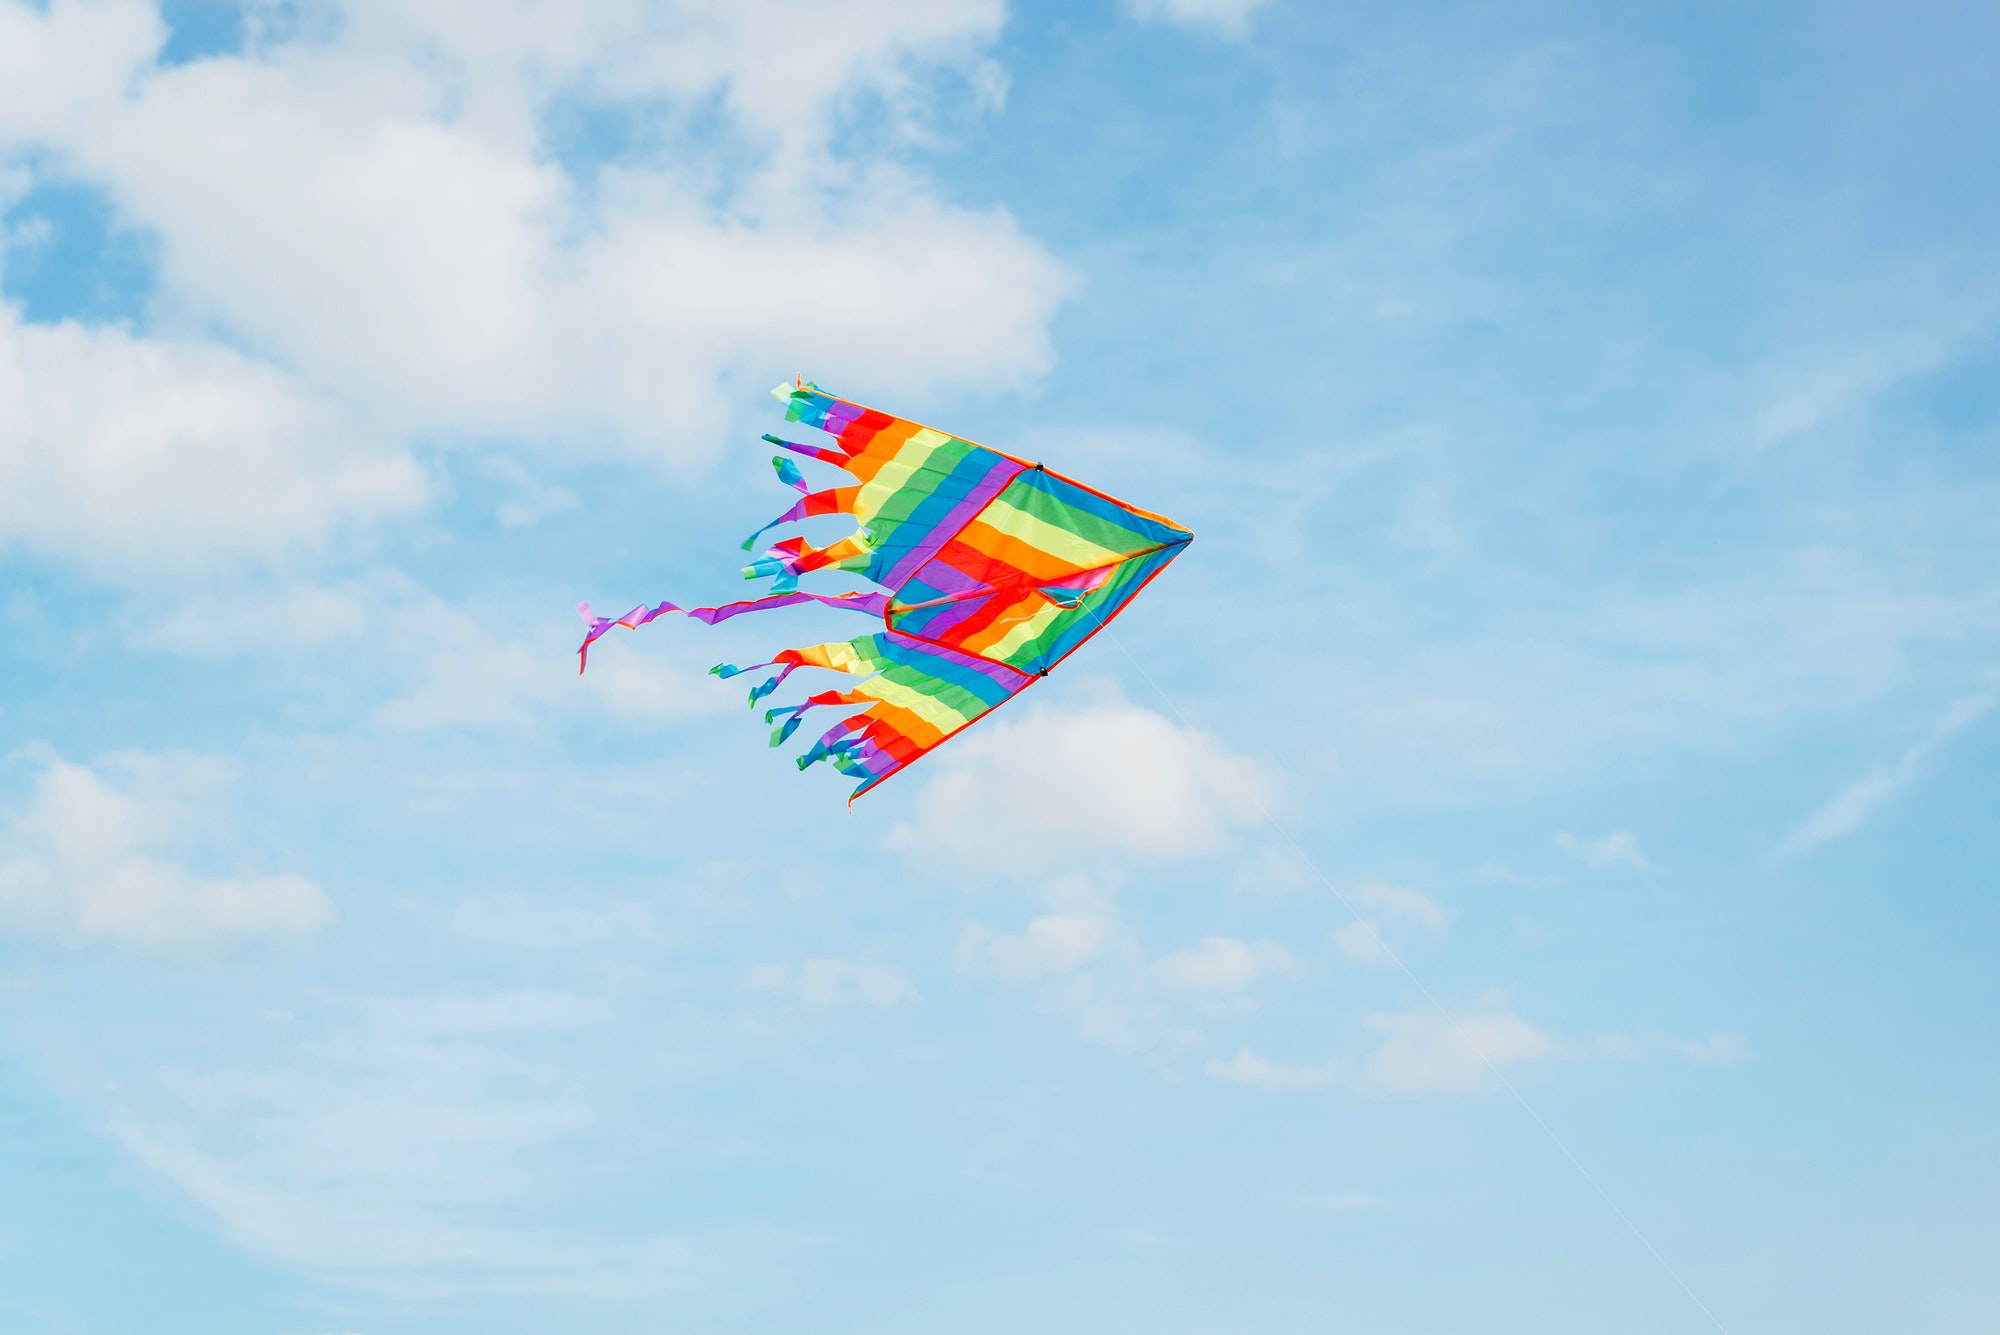 Rainbow kite high in blue cloudy sky, sunny day outdoors. Color kite flying, fun and games in nature